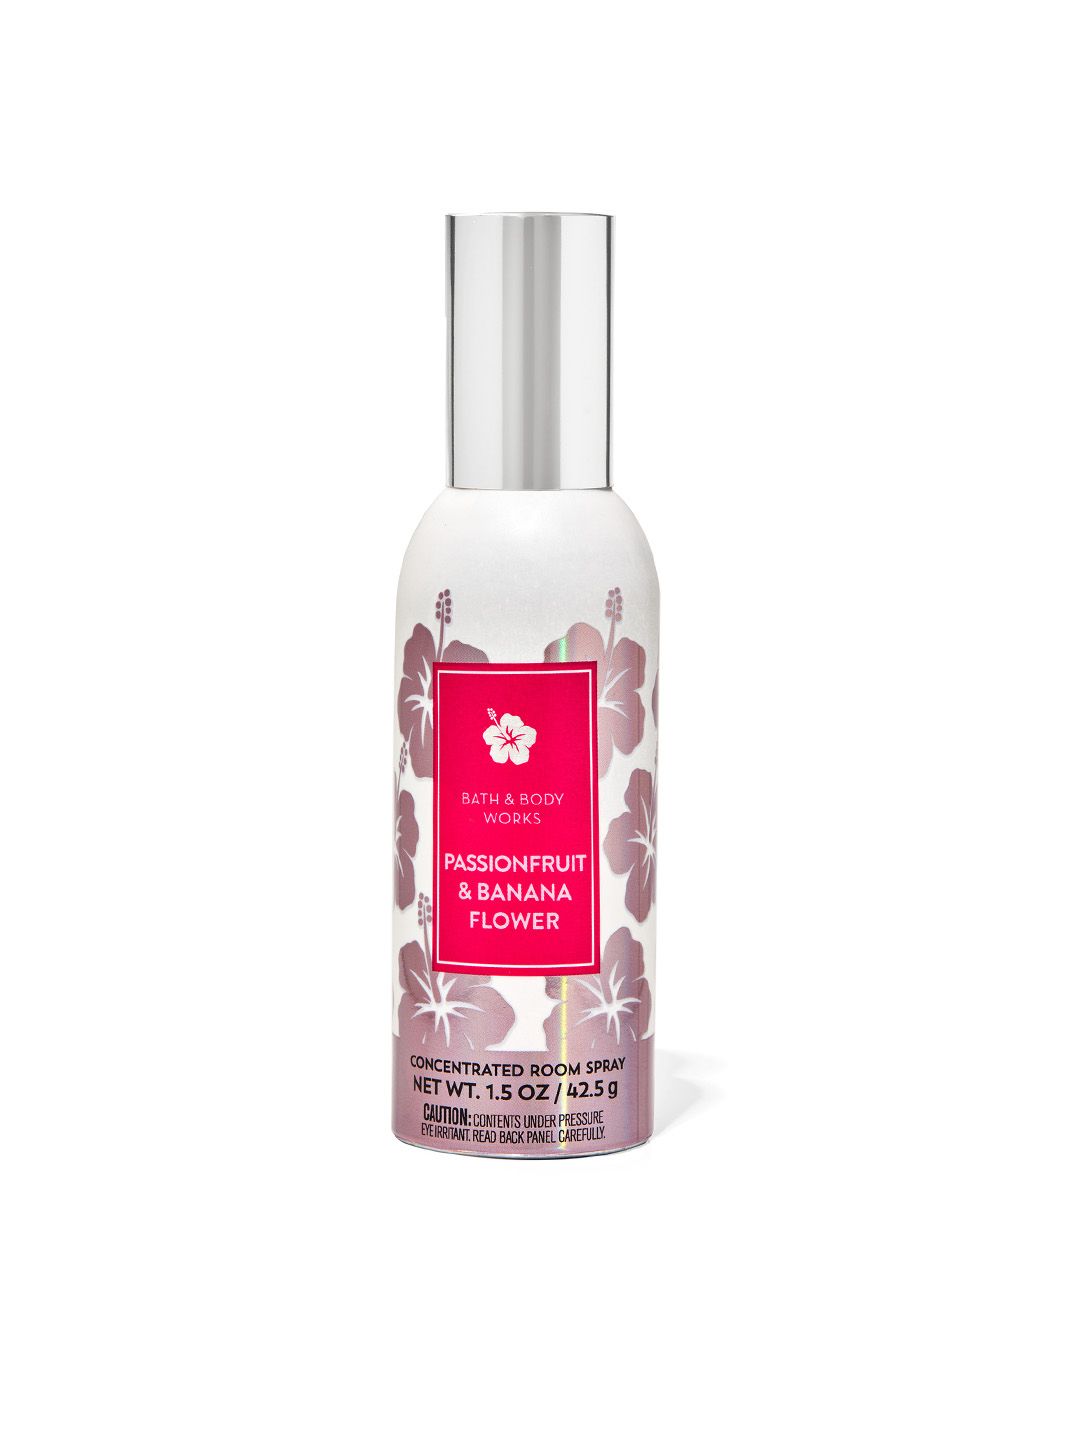 Bath & Body Works Passionfruit & Banana Flower Concentrated Room Spray - 42.5 g Price in India